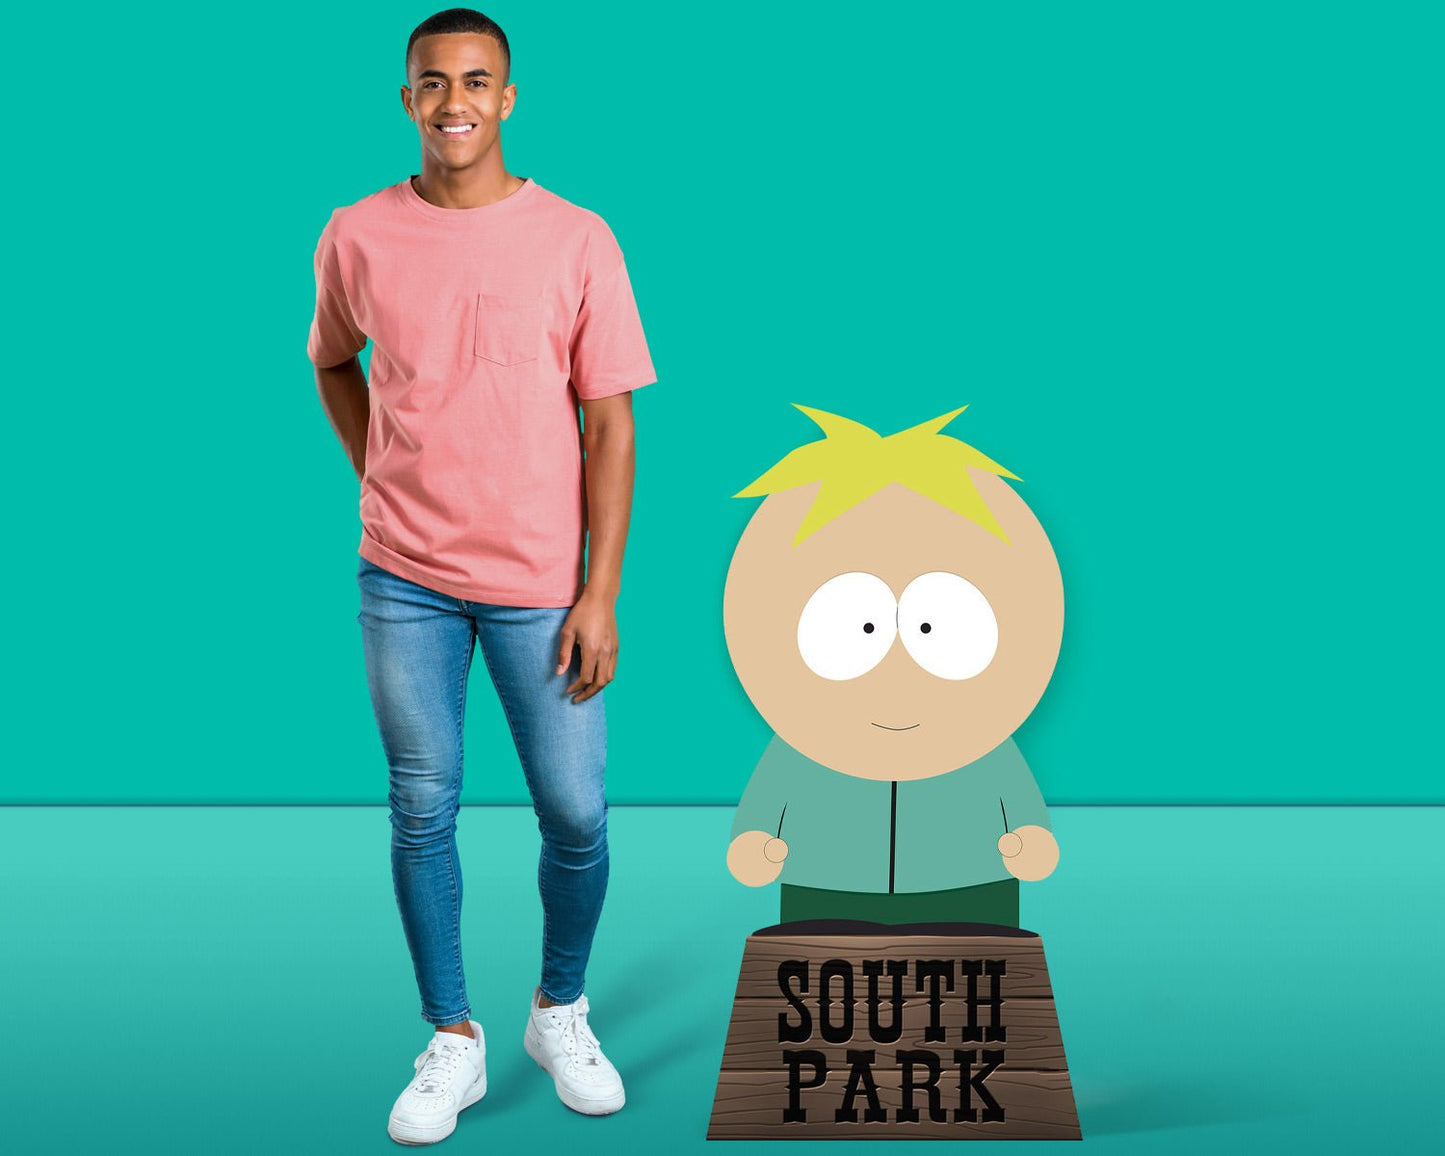 South Park Butters Life - Sized Cardboard Cutout Standee - Paramount Shop